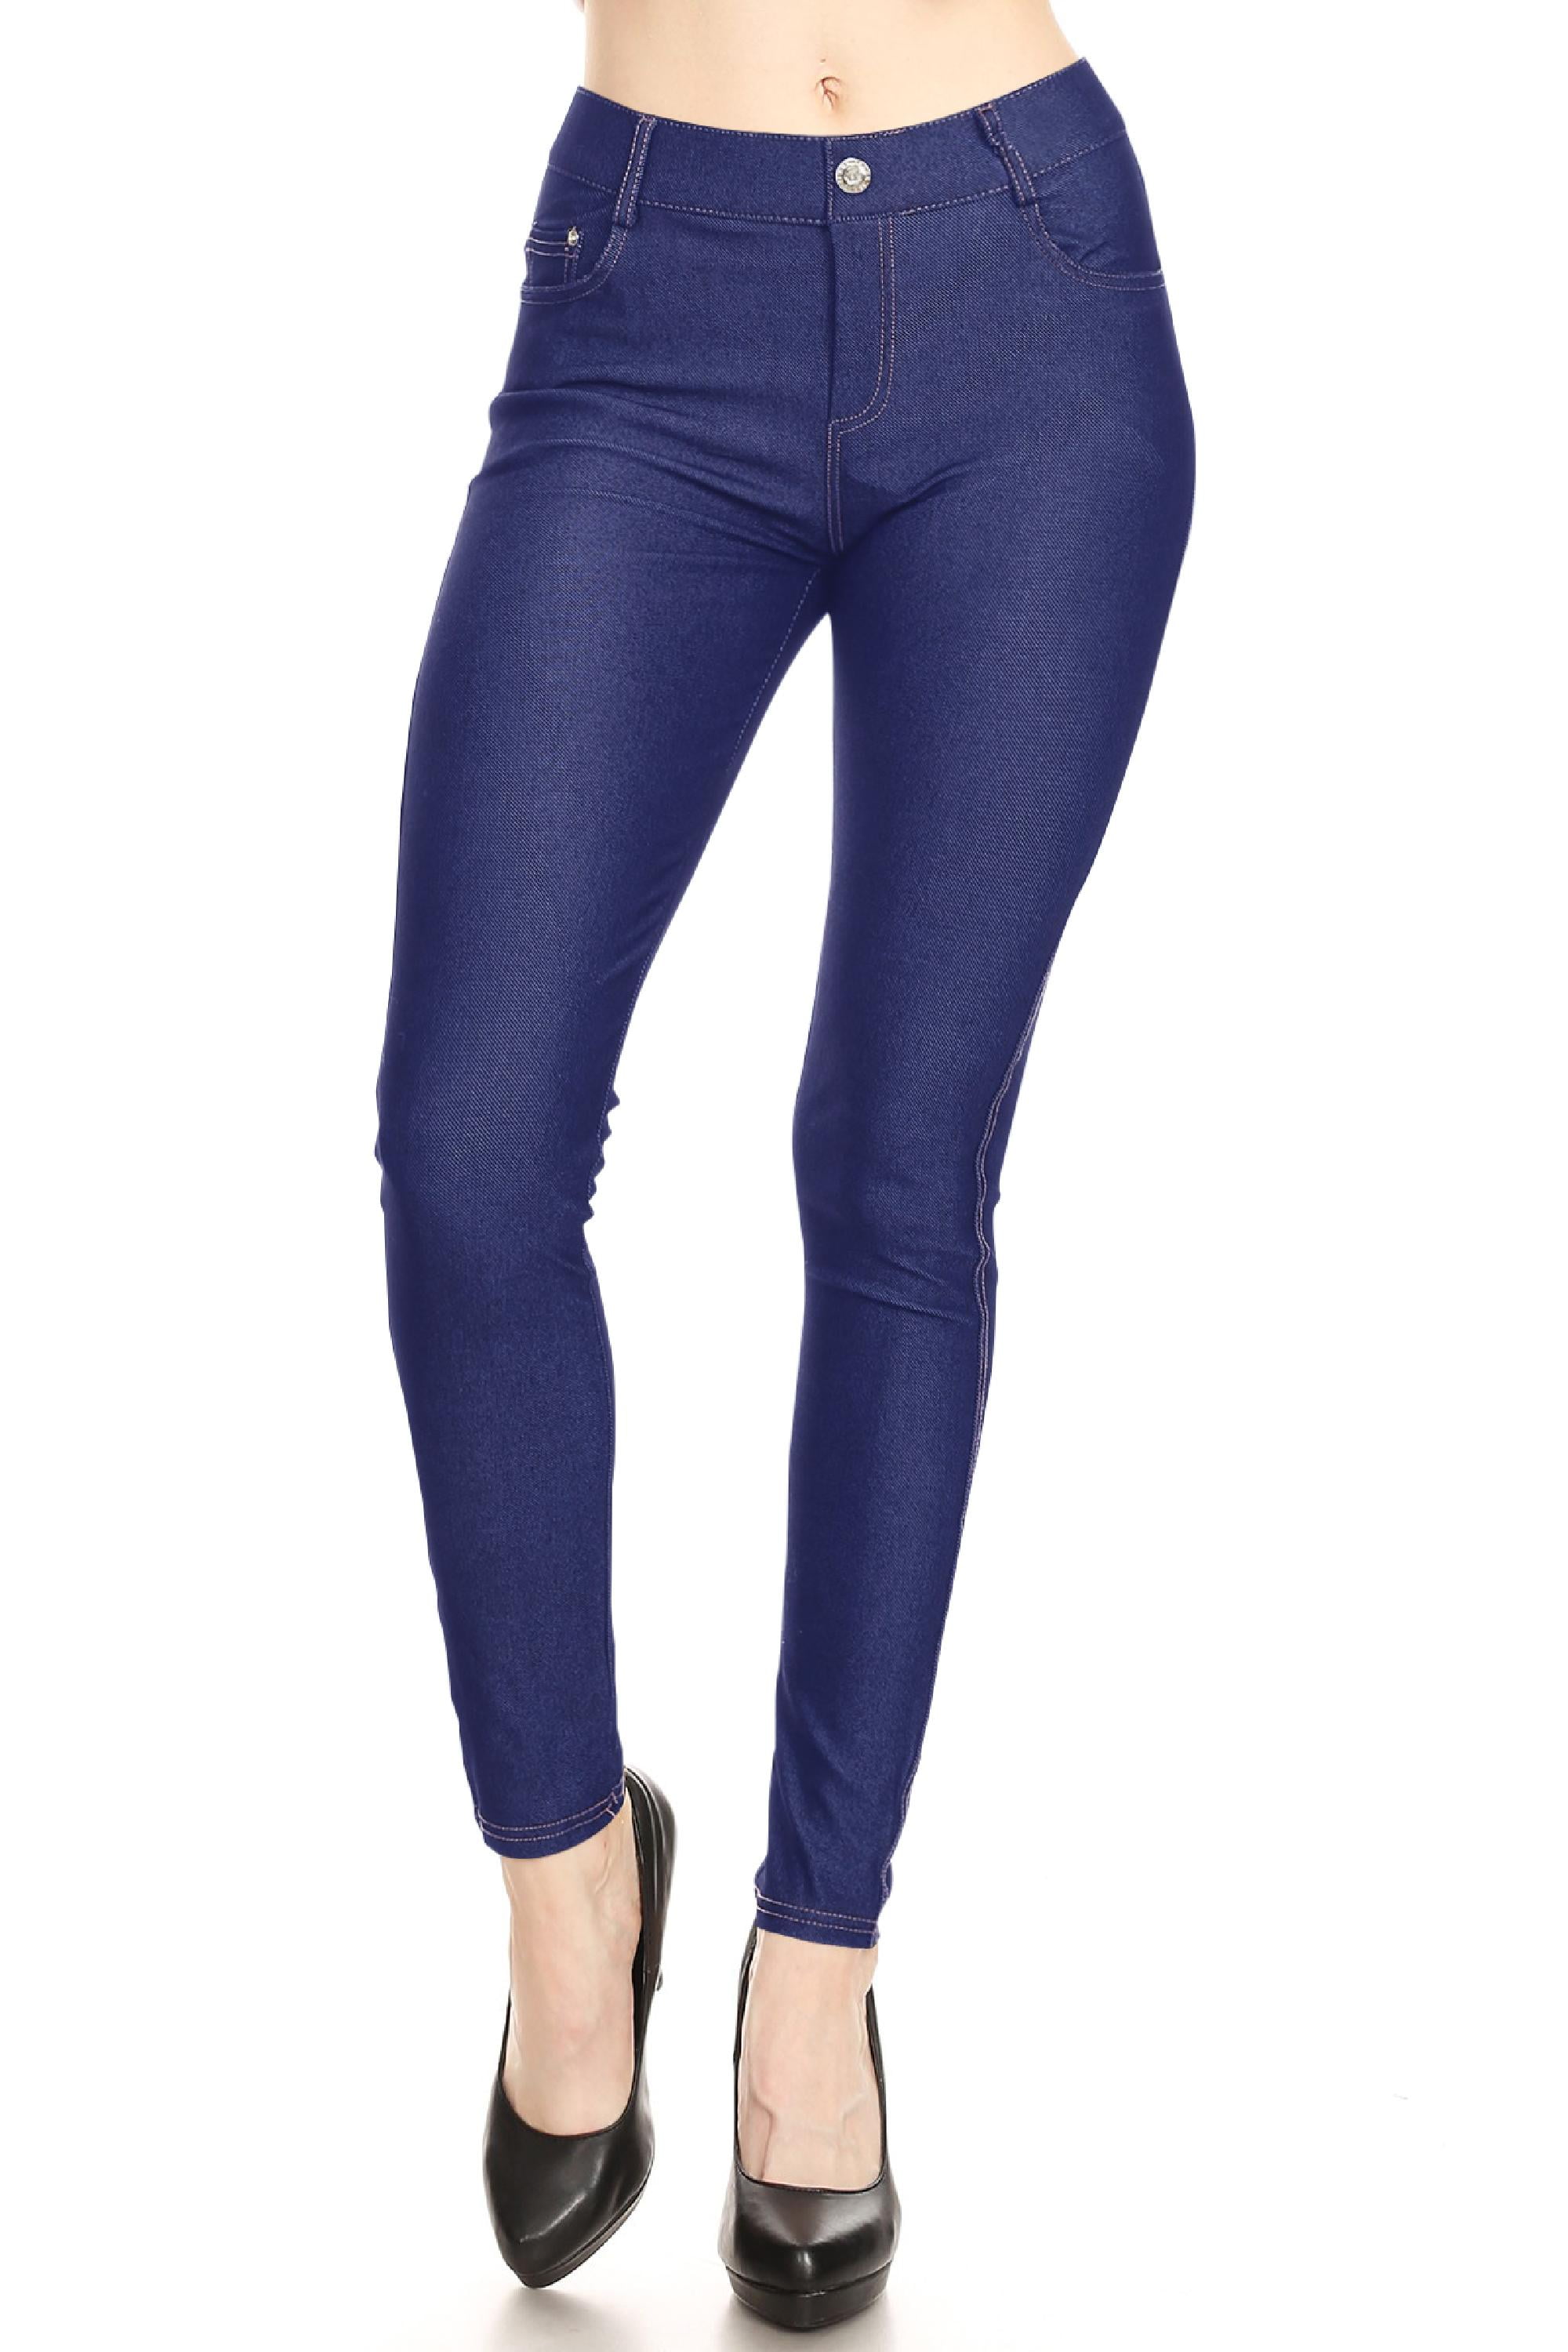 Women's Stretch Jeggings with Pockets Slimming Pull On Jean Jeggings Long  Pant 